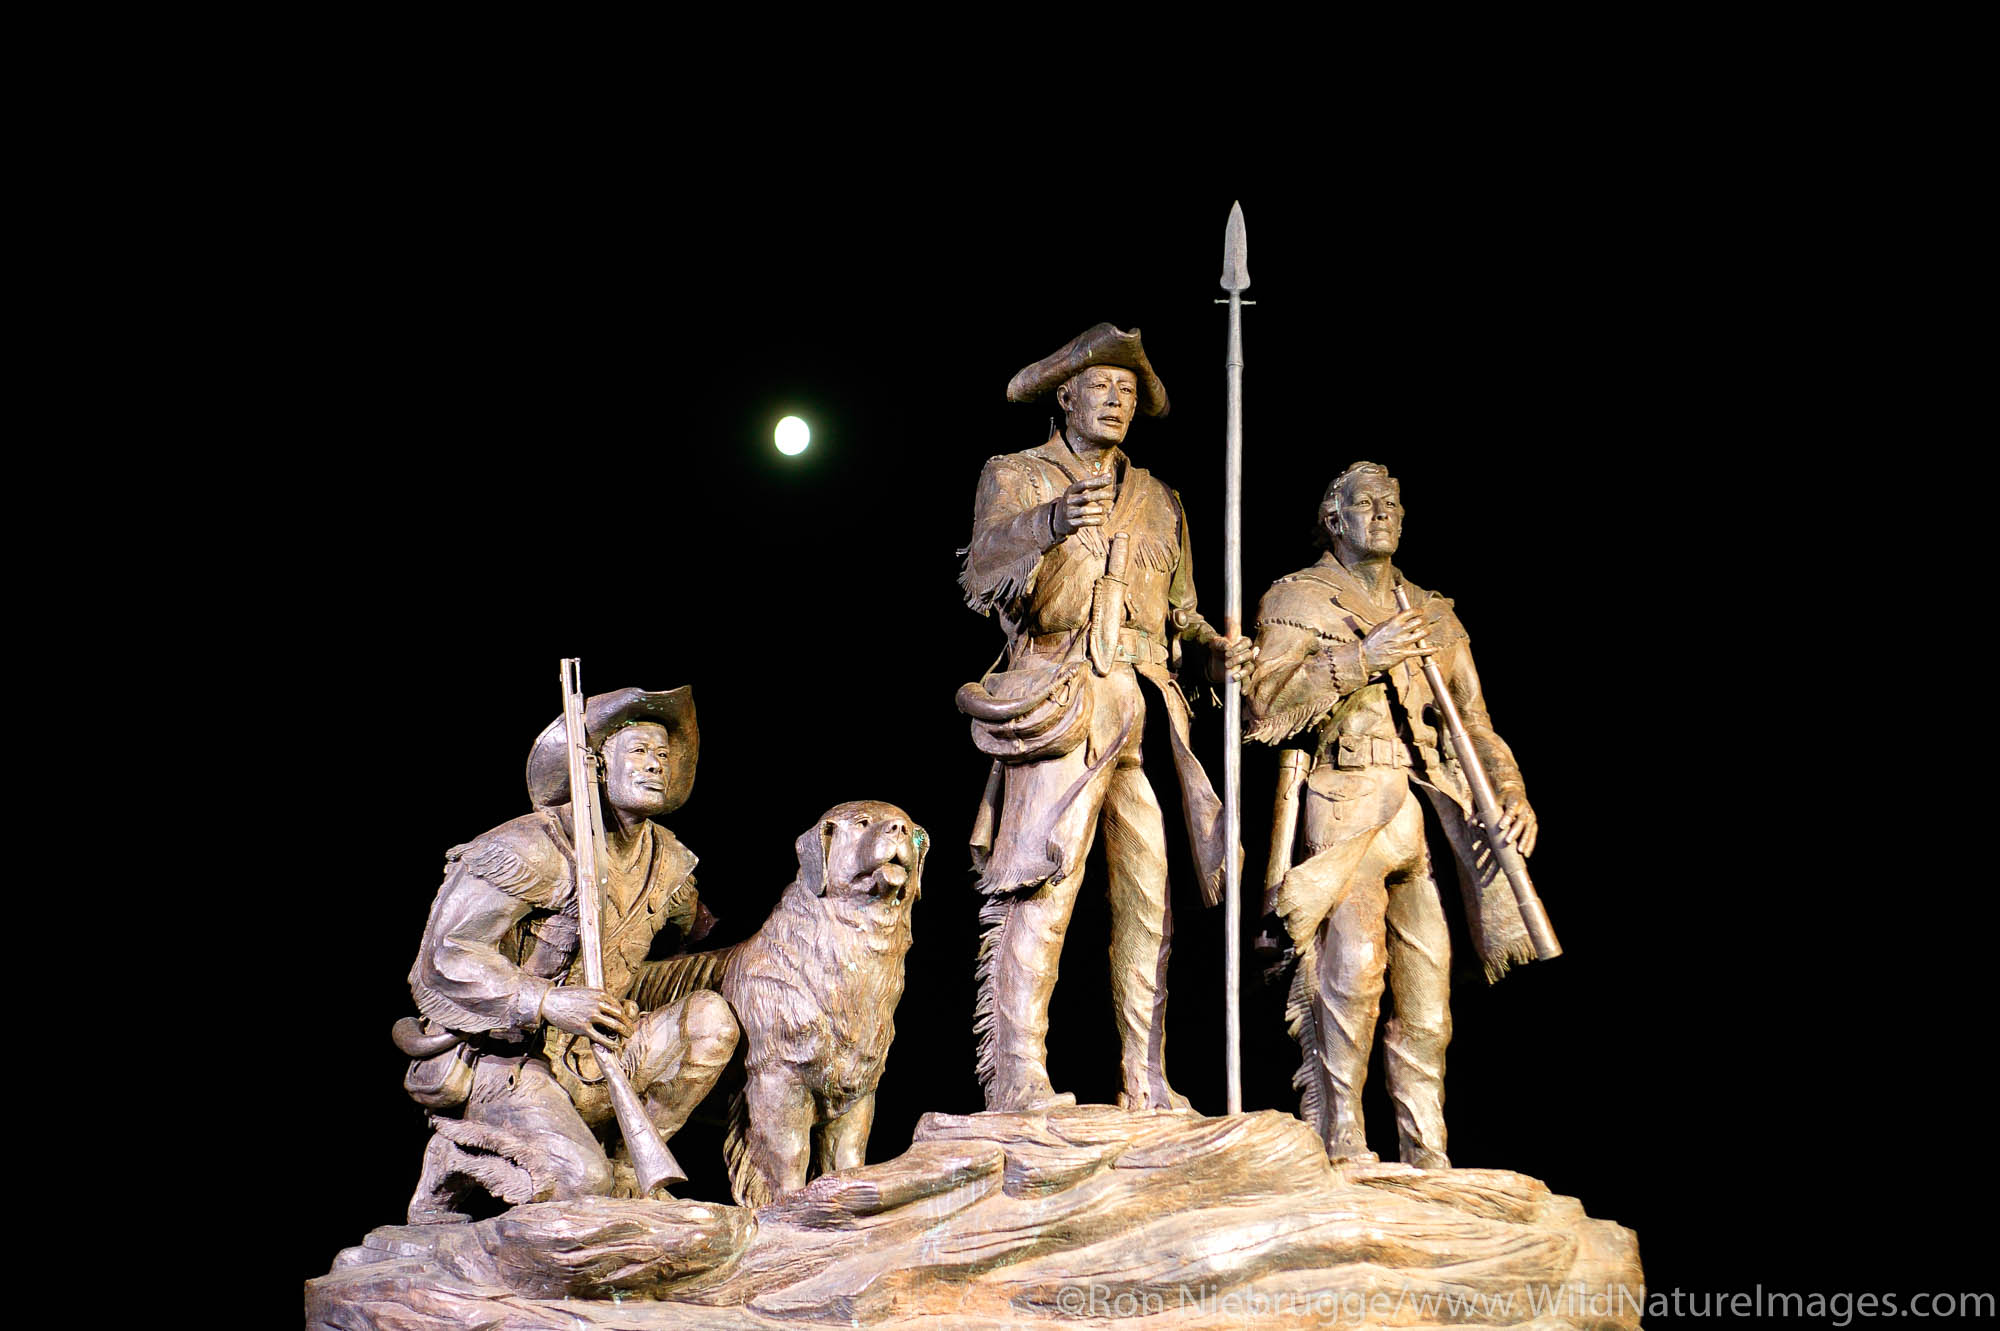 This Lewis and Clark sculpture "Explorers at the Portage" by Robert M. Scrivor has both Captains, York and Lewis's dog Seaman...